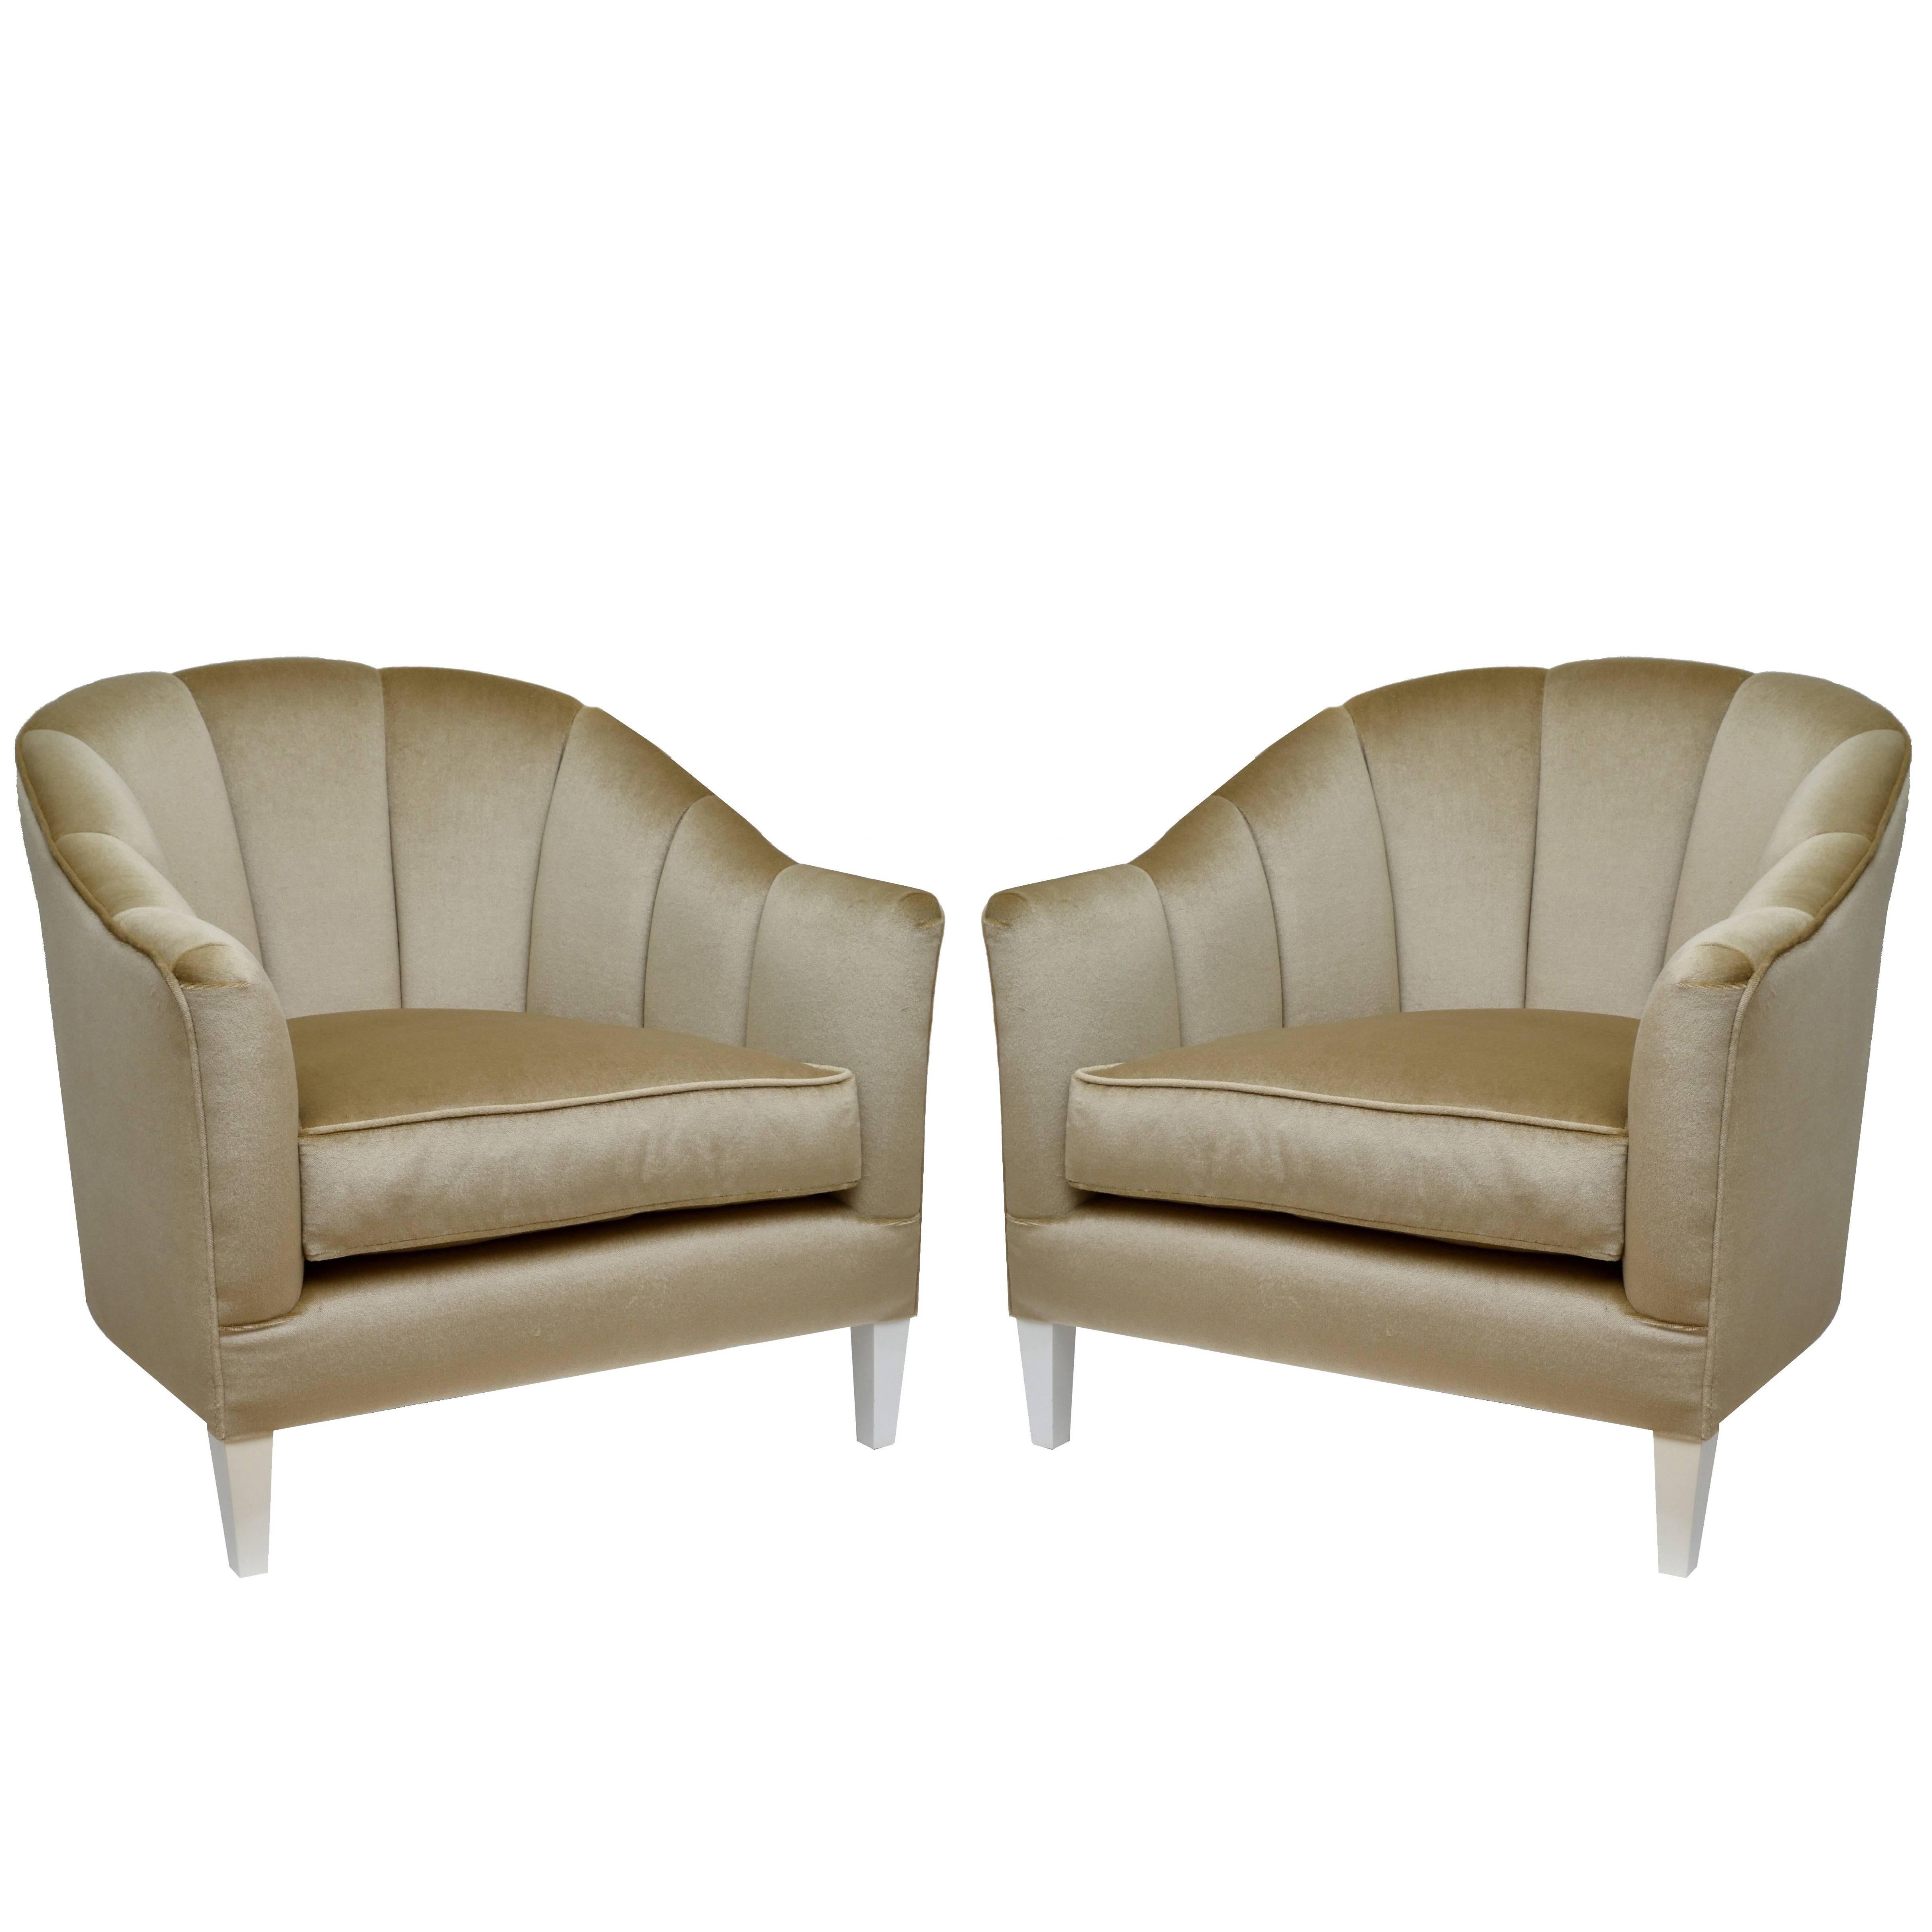 Pair of Contemporary Lounge Chairs in Mohair Scalloped Backrest For Sale